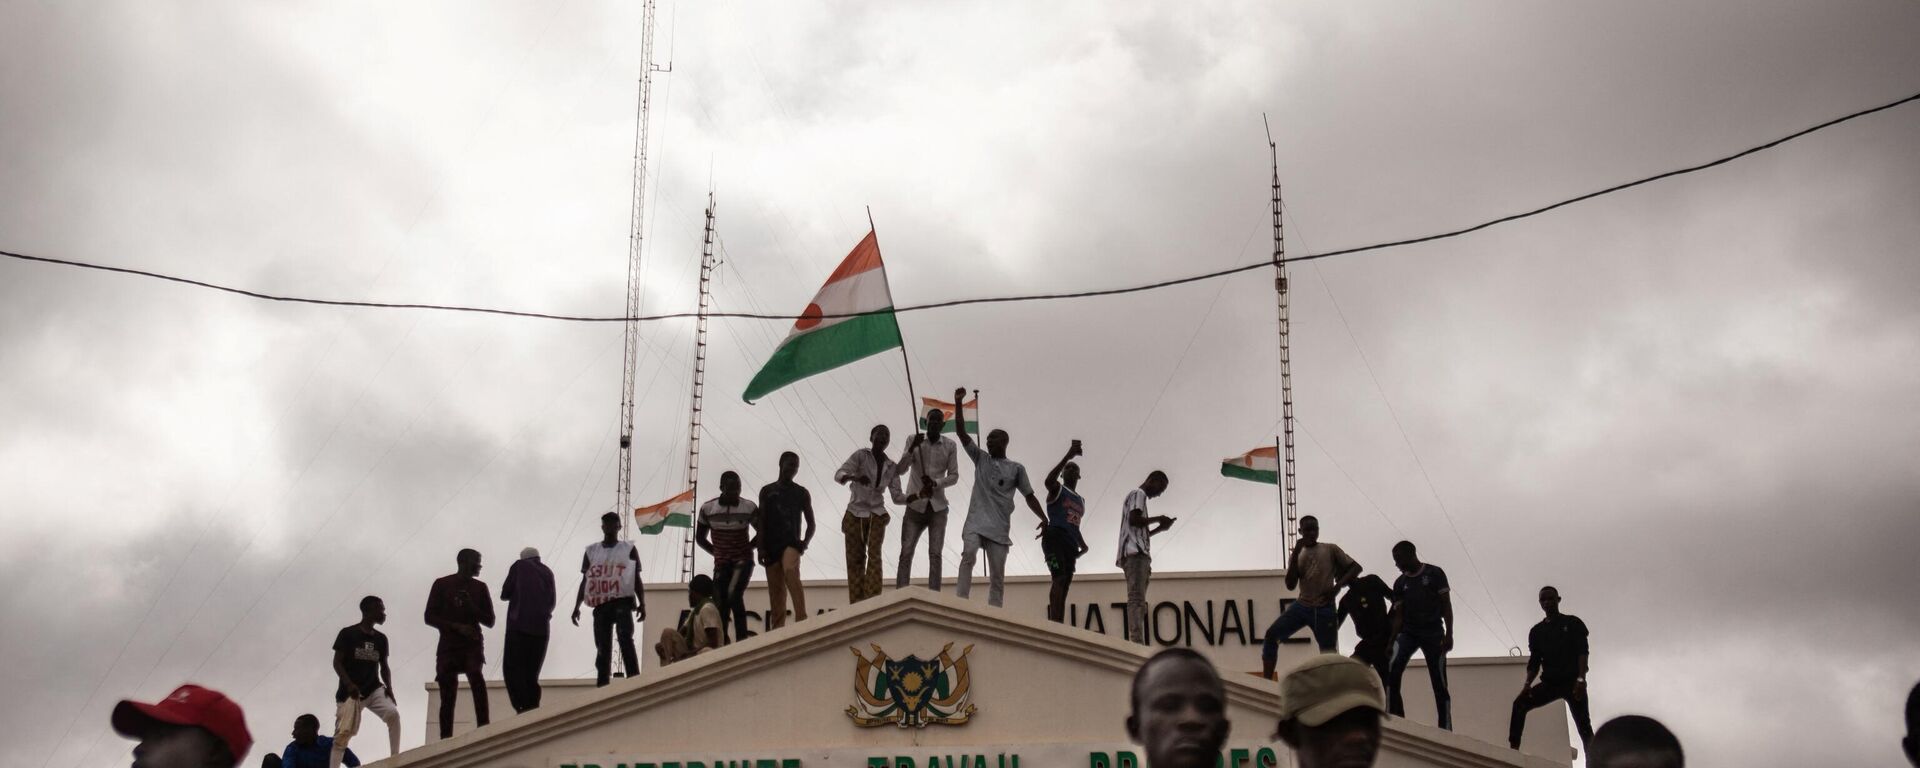 Protesters hold a Niger flag during a demonstration on independence day in Niamey on August 3, 2023. Hundreds of people backing the coup in Niger gathered on August 3, 2023 for a mass rally in the capital Niamey with some brandishing giant Russian flags. - Sputnik International, 1920, 14.08.2023